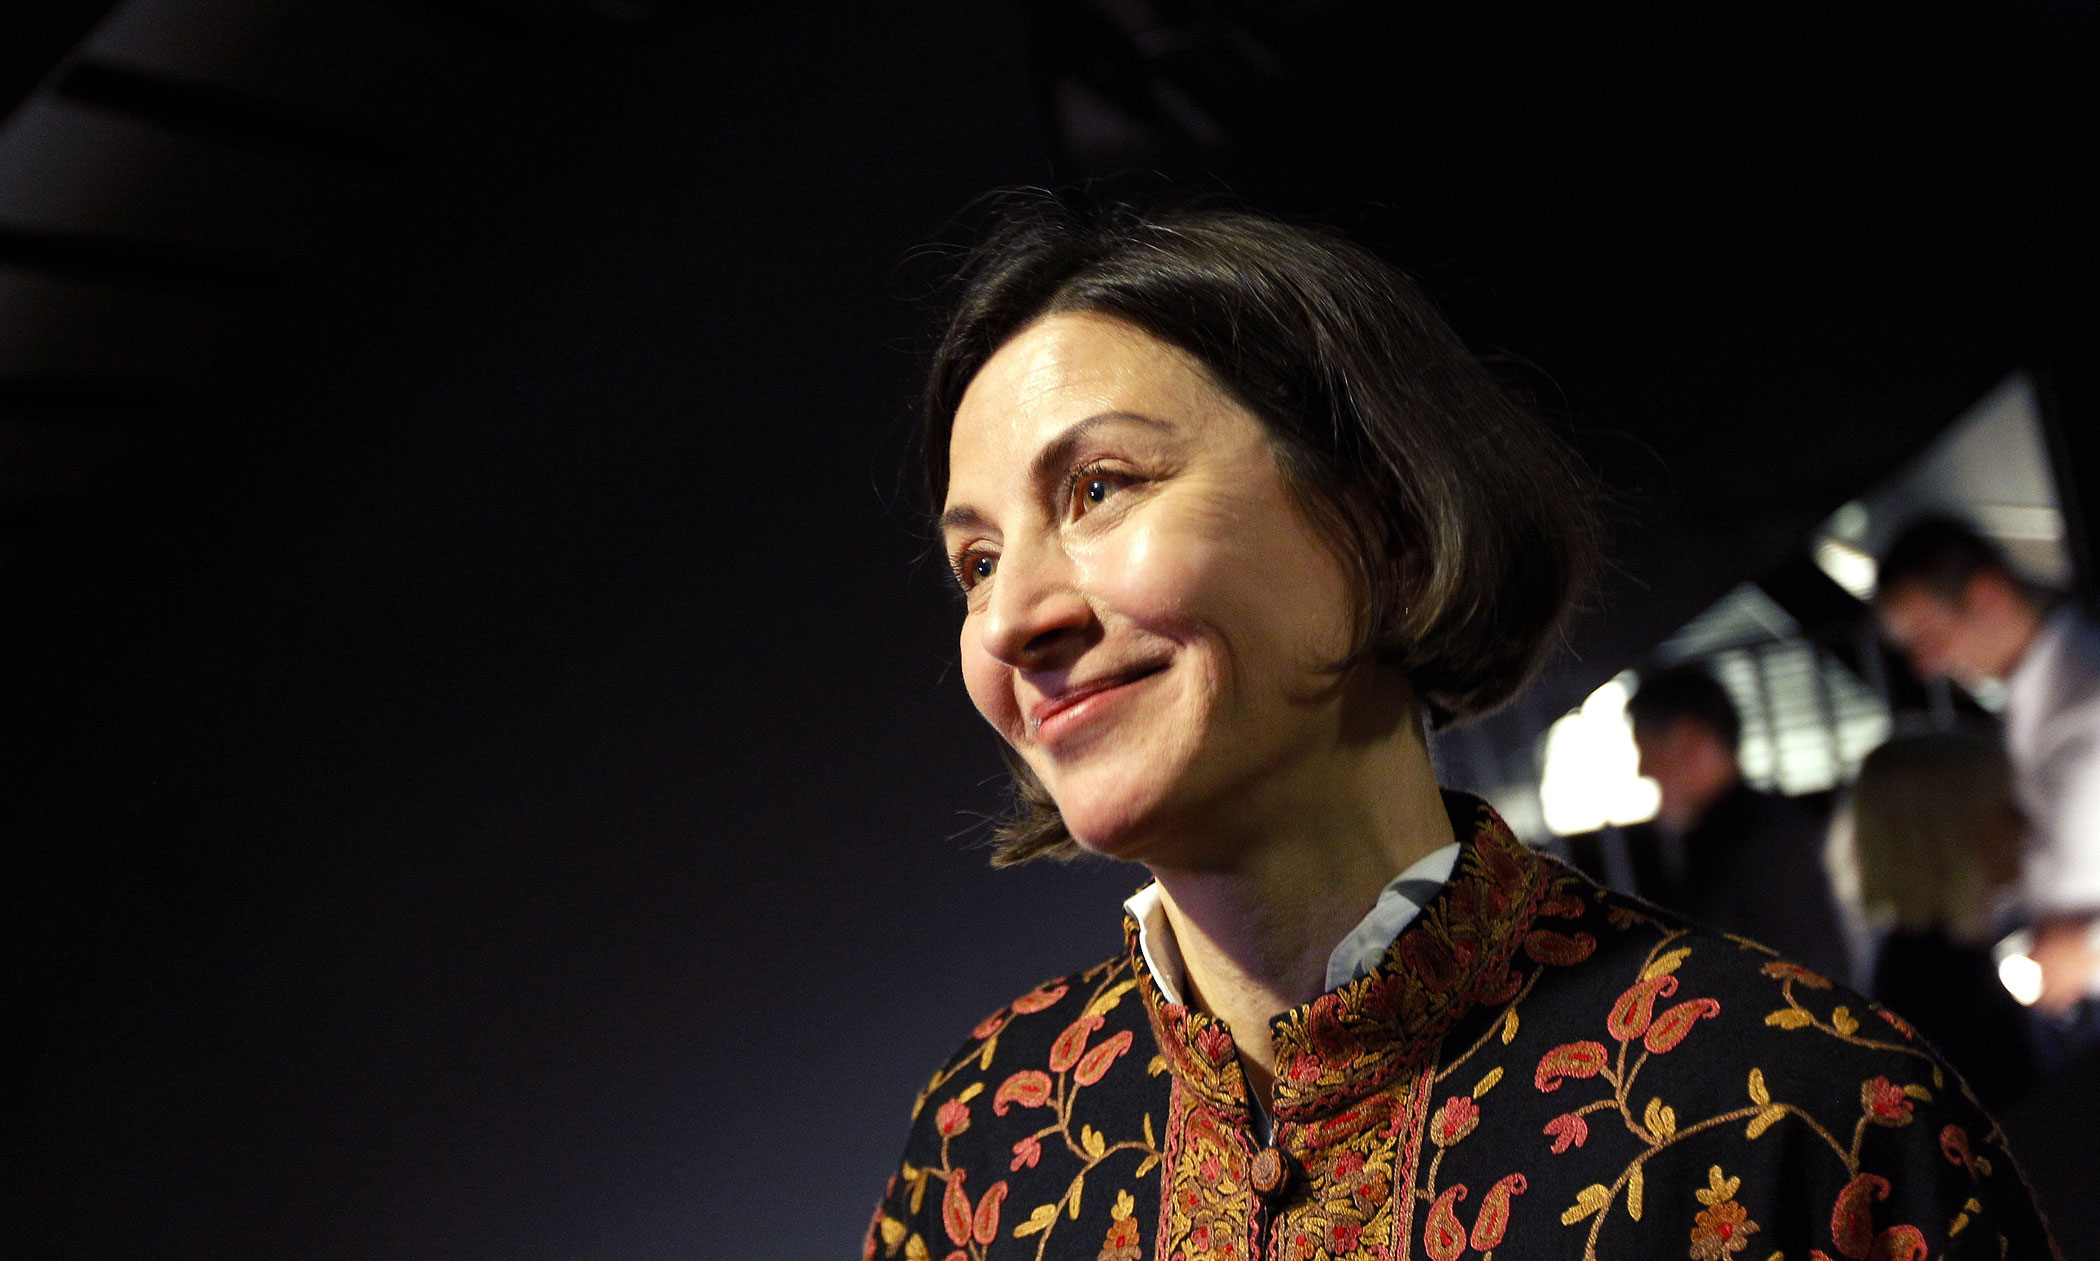 Donna Tartt at a book launch for <i>The Goldfinch</i> in Amsterdam, on September 22, 2013. (Bas Czerwinski—AFP/Getty Images)